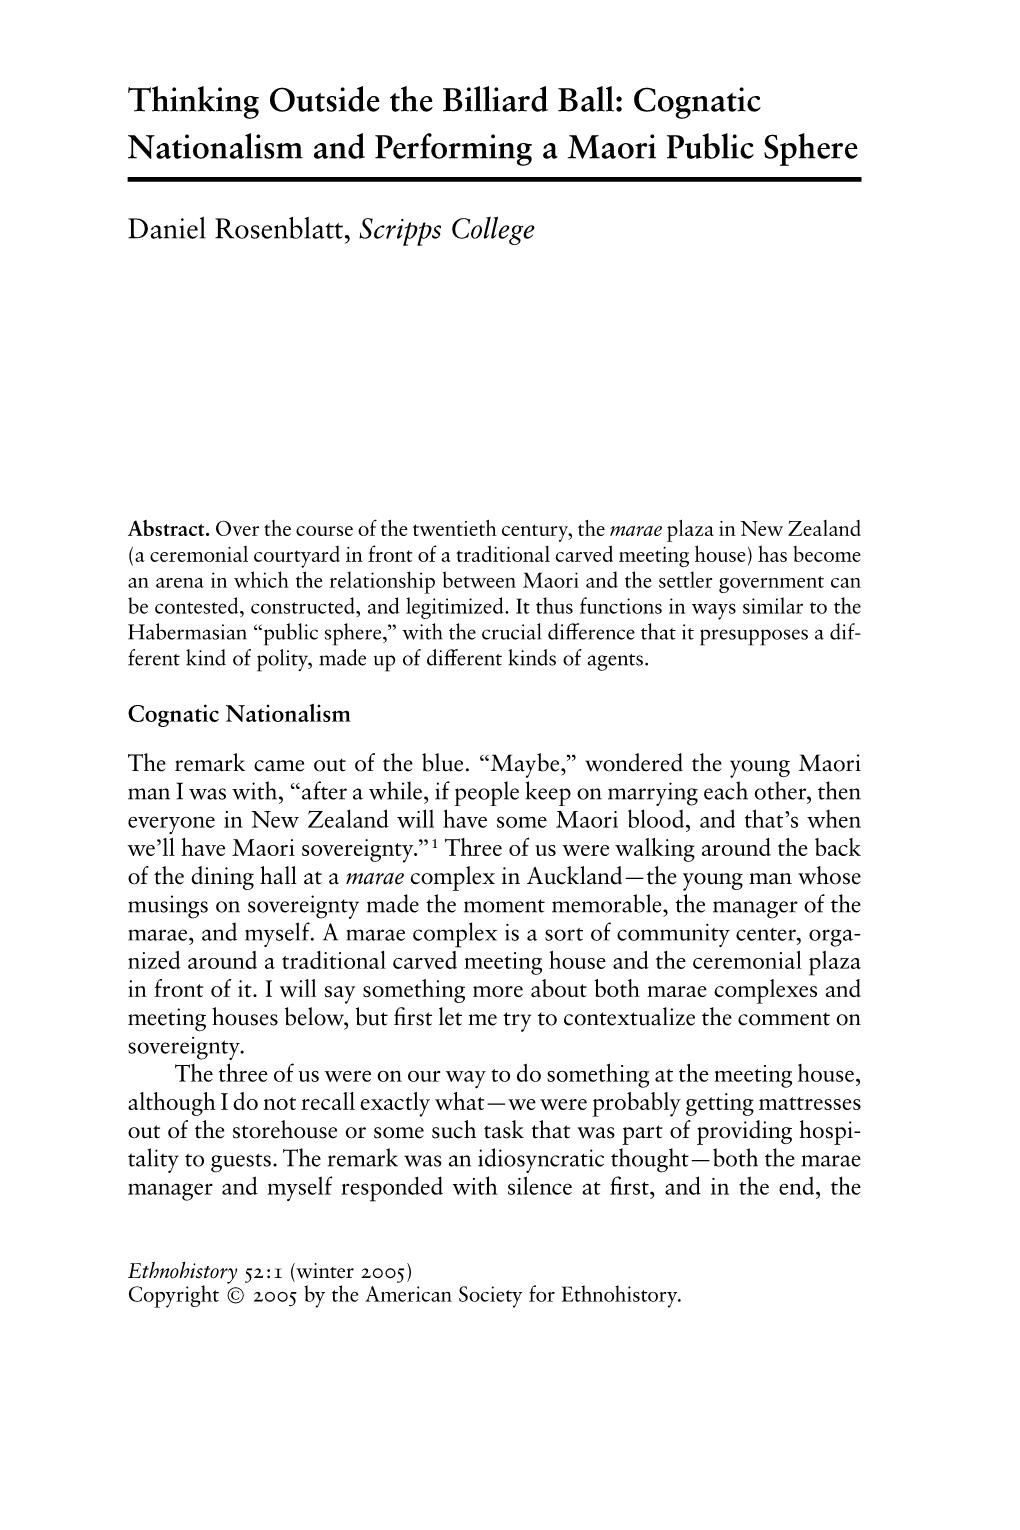 Cognatic Nationalism and Performing a Maori Public Sphere